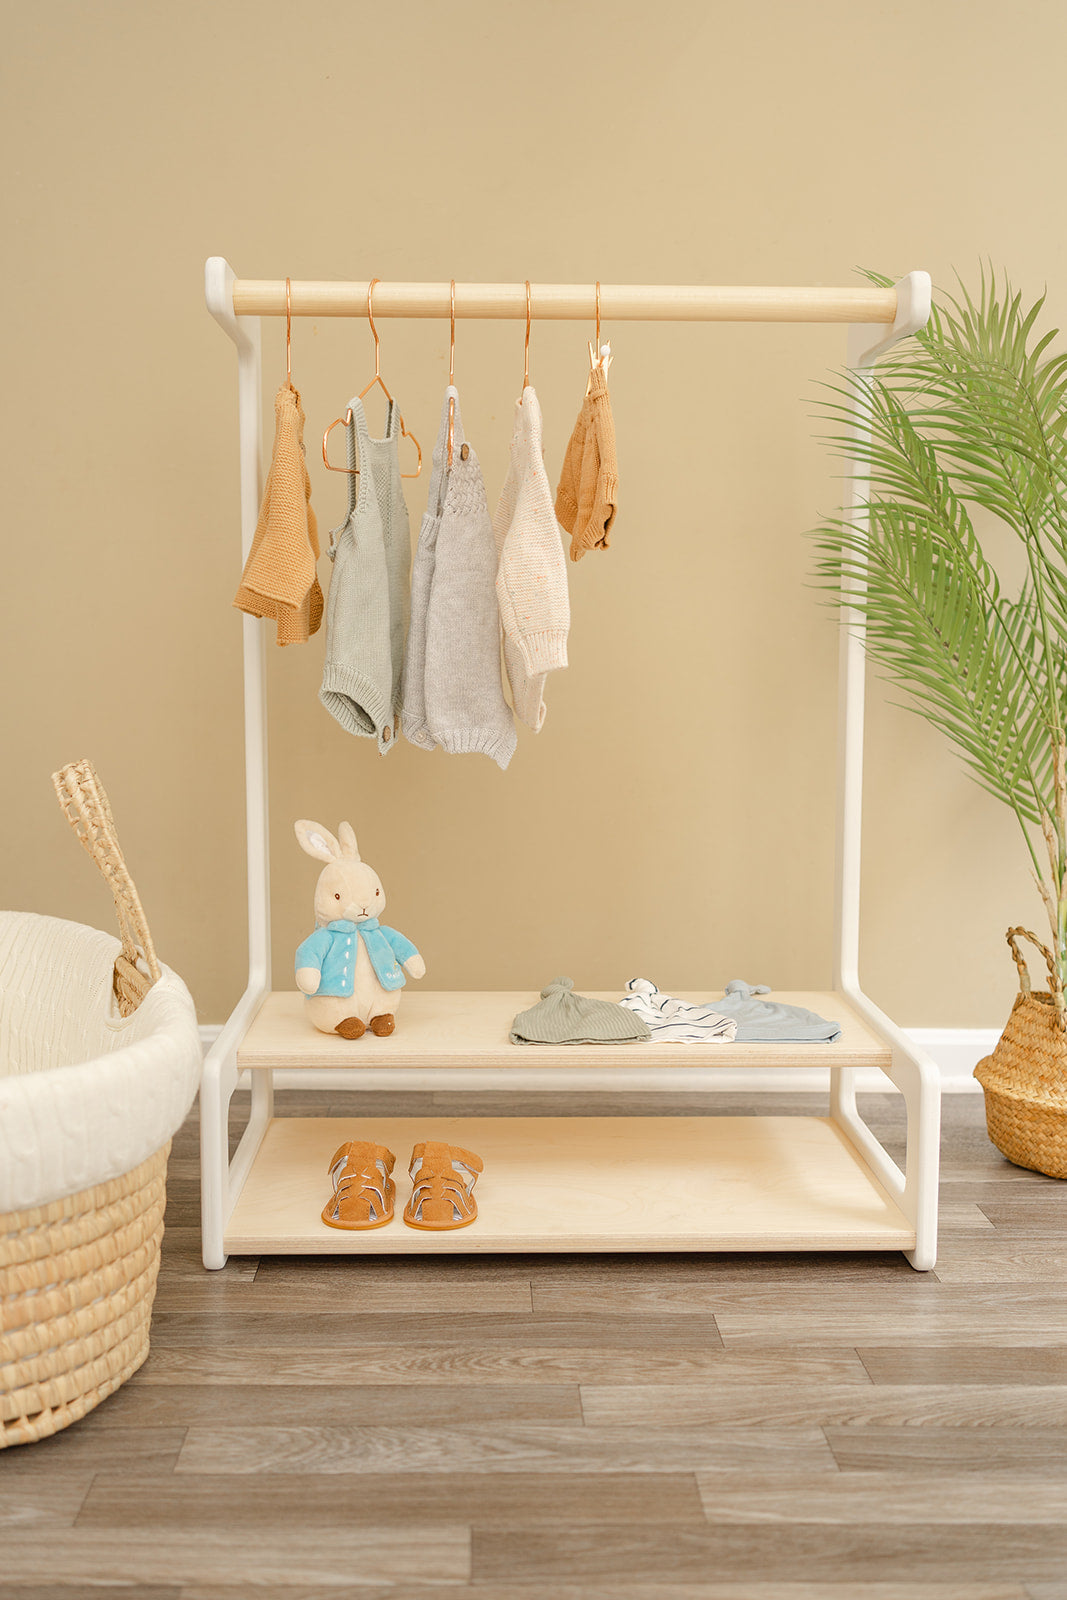 A kids clothing rack with bar and two shelves for boots or shoes